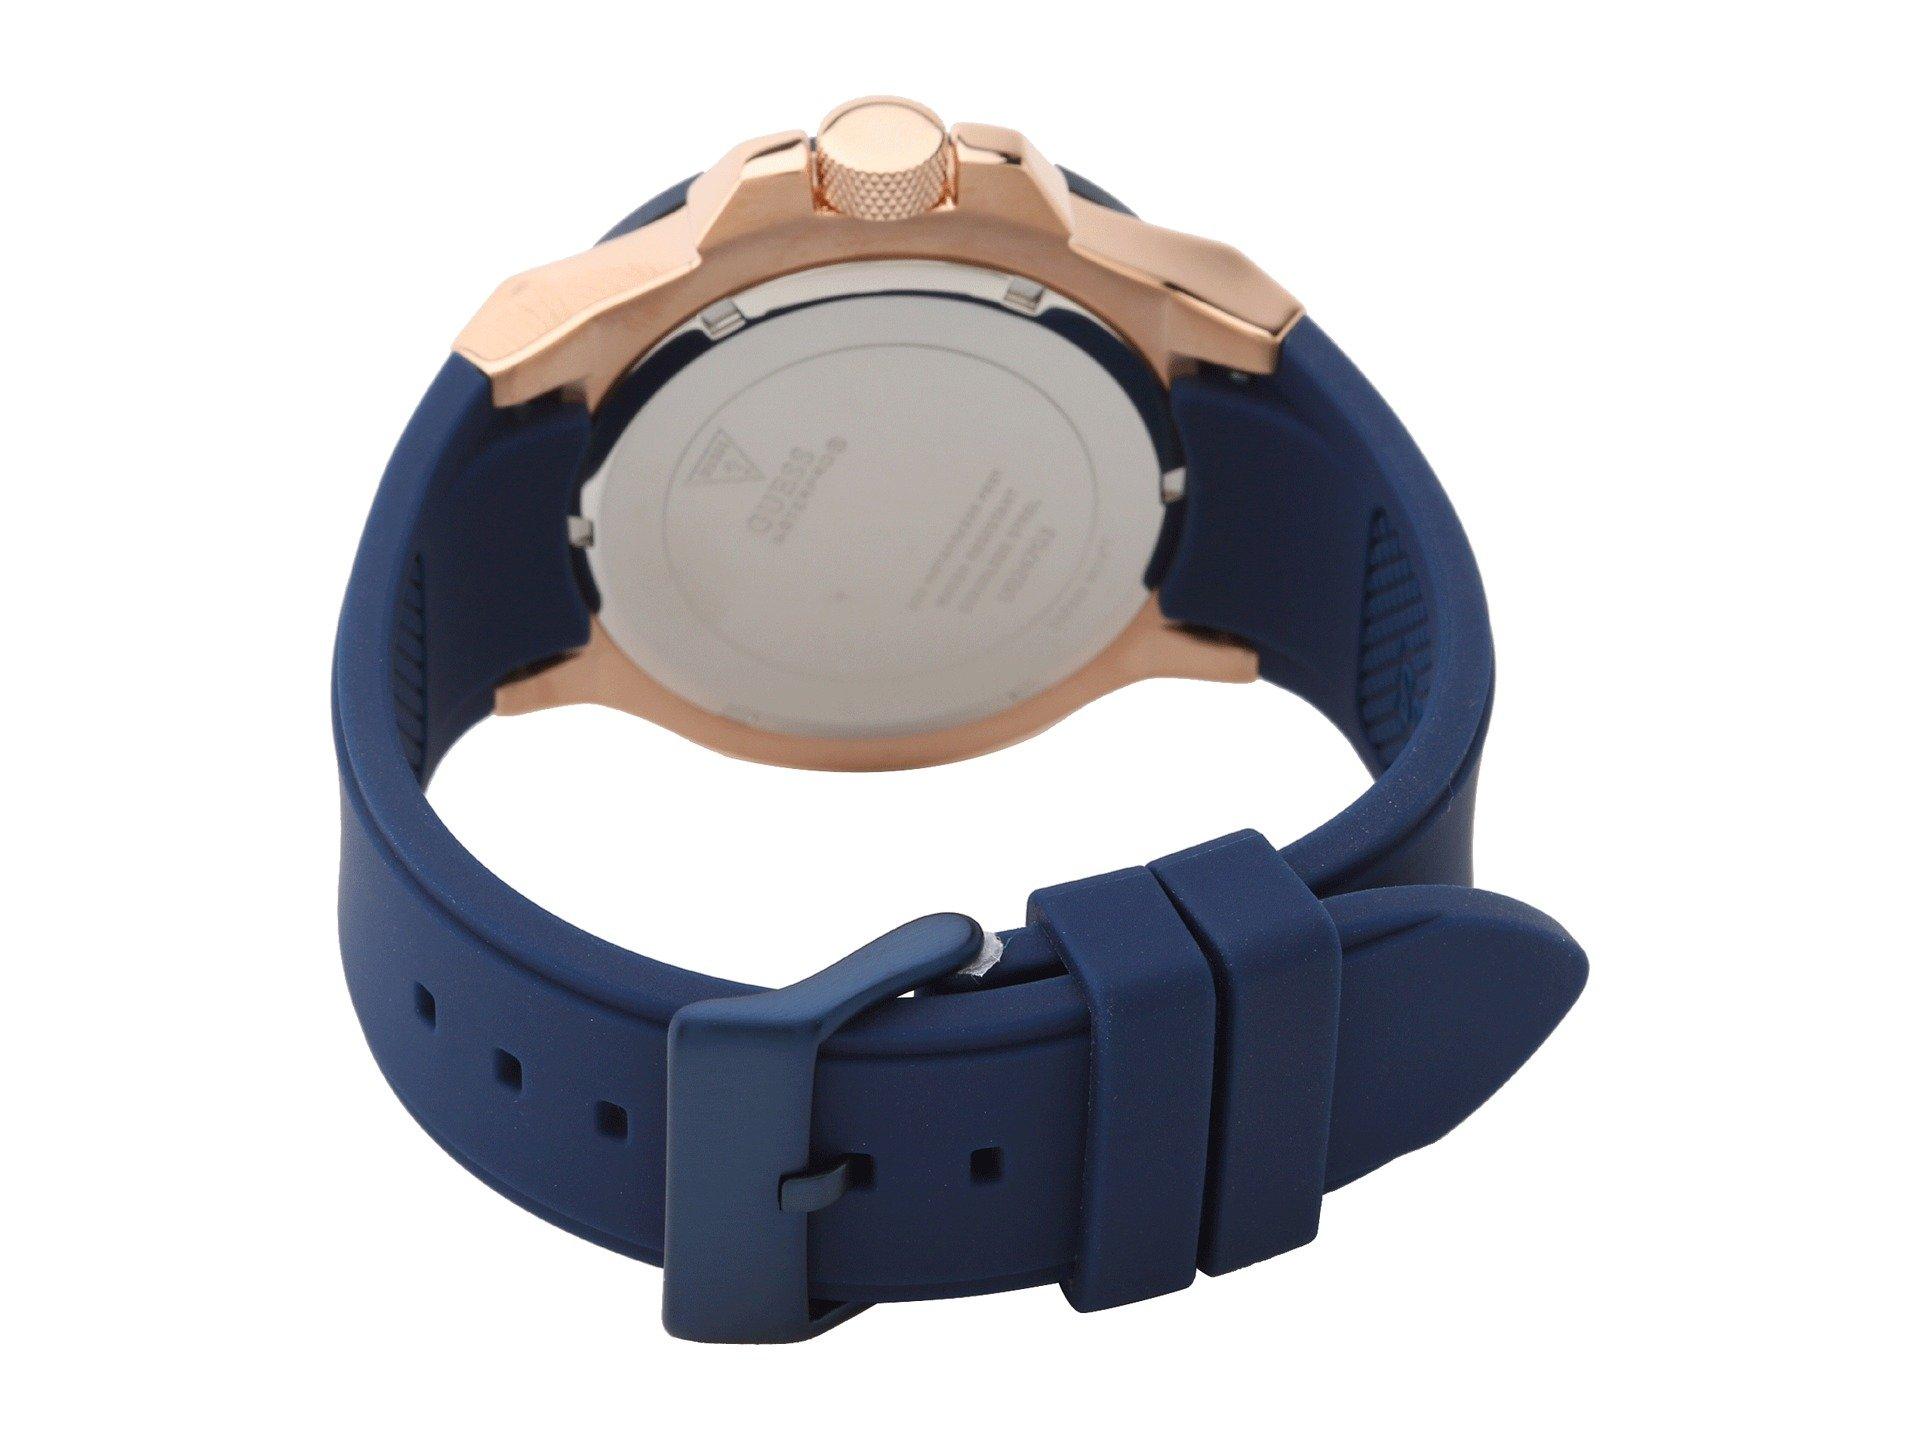 Guess U0247g3 Rigor Standout Sport Casual Watch in Blue for Men - Lyst